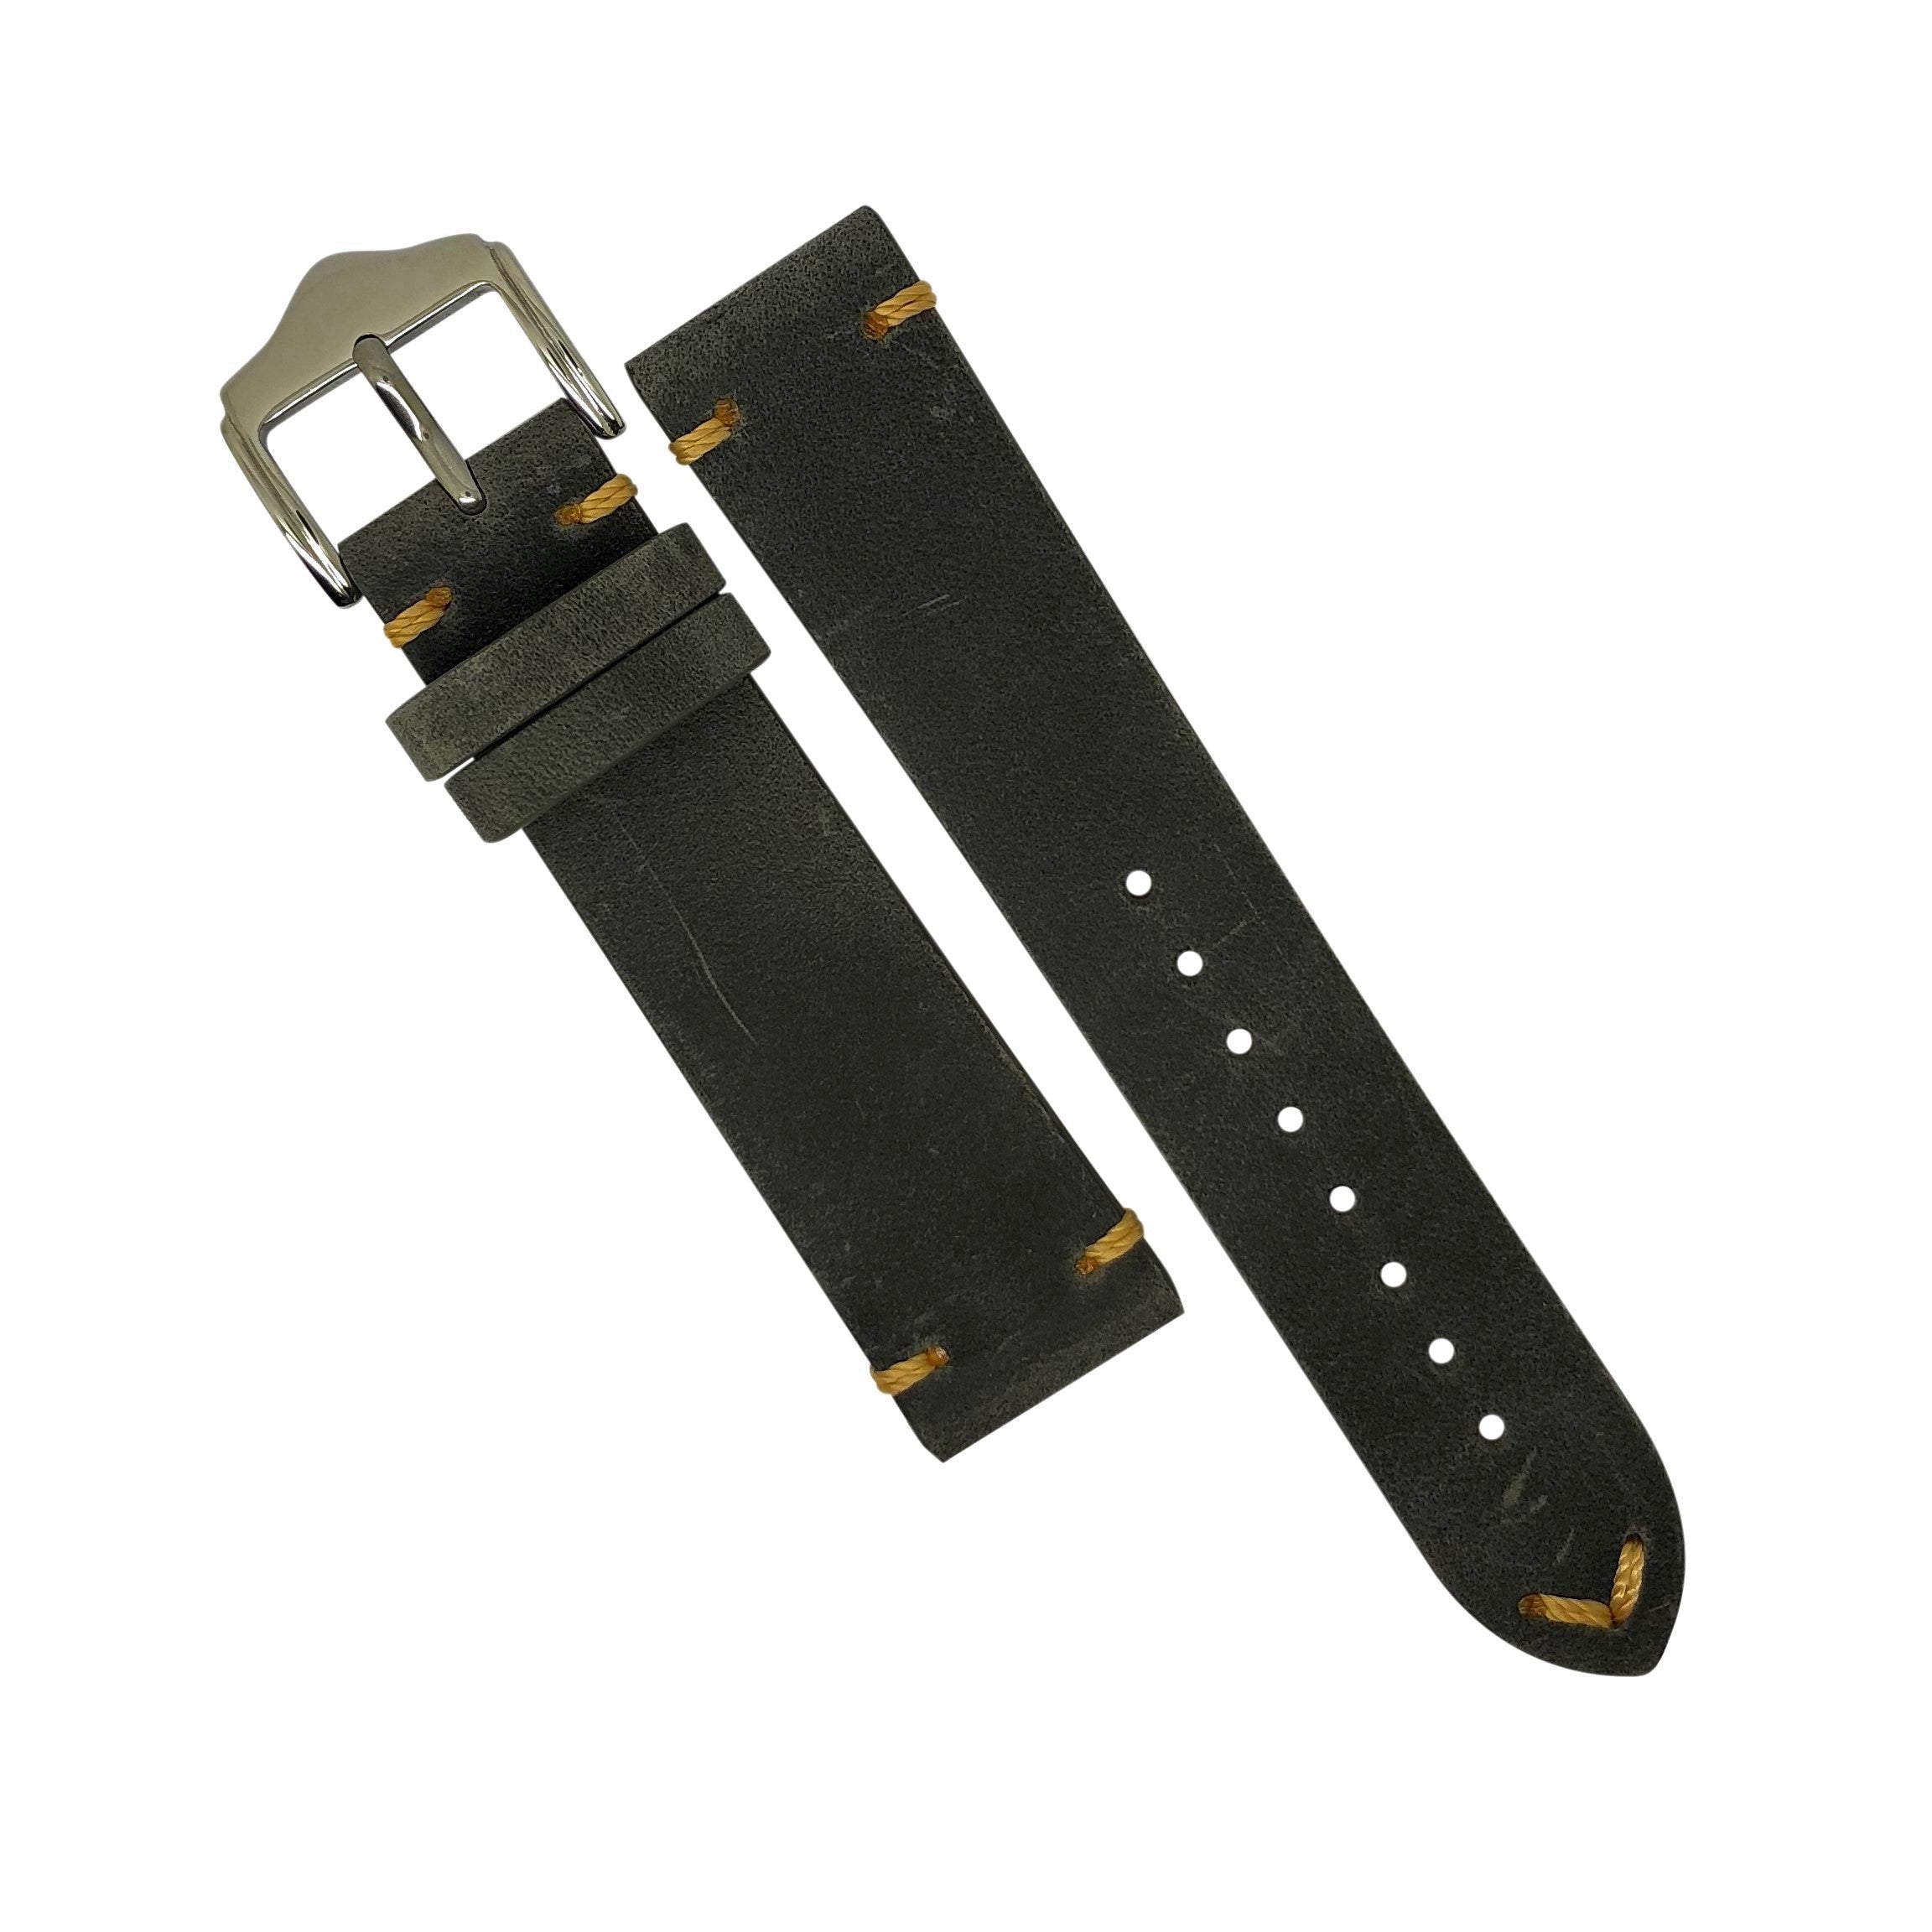 Premium Vintage Calf Leather Watch Strap in Grey (20mm) - Nomad Watch Works Malaysia